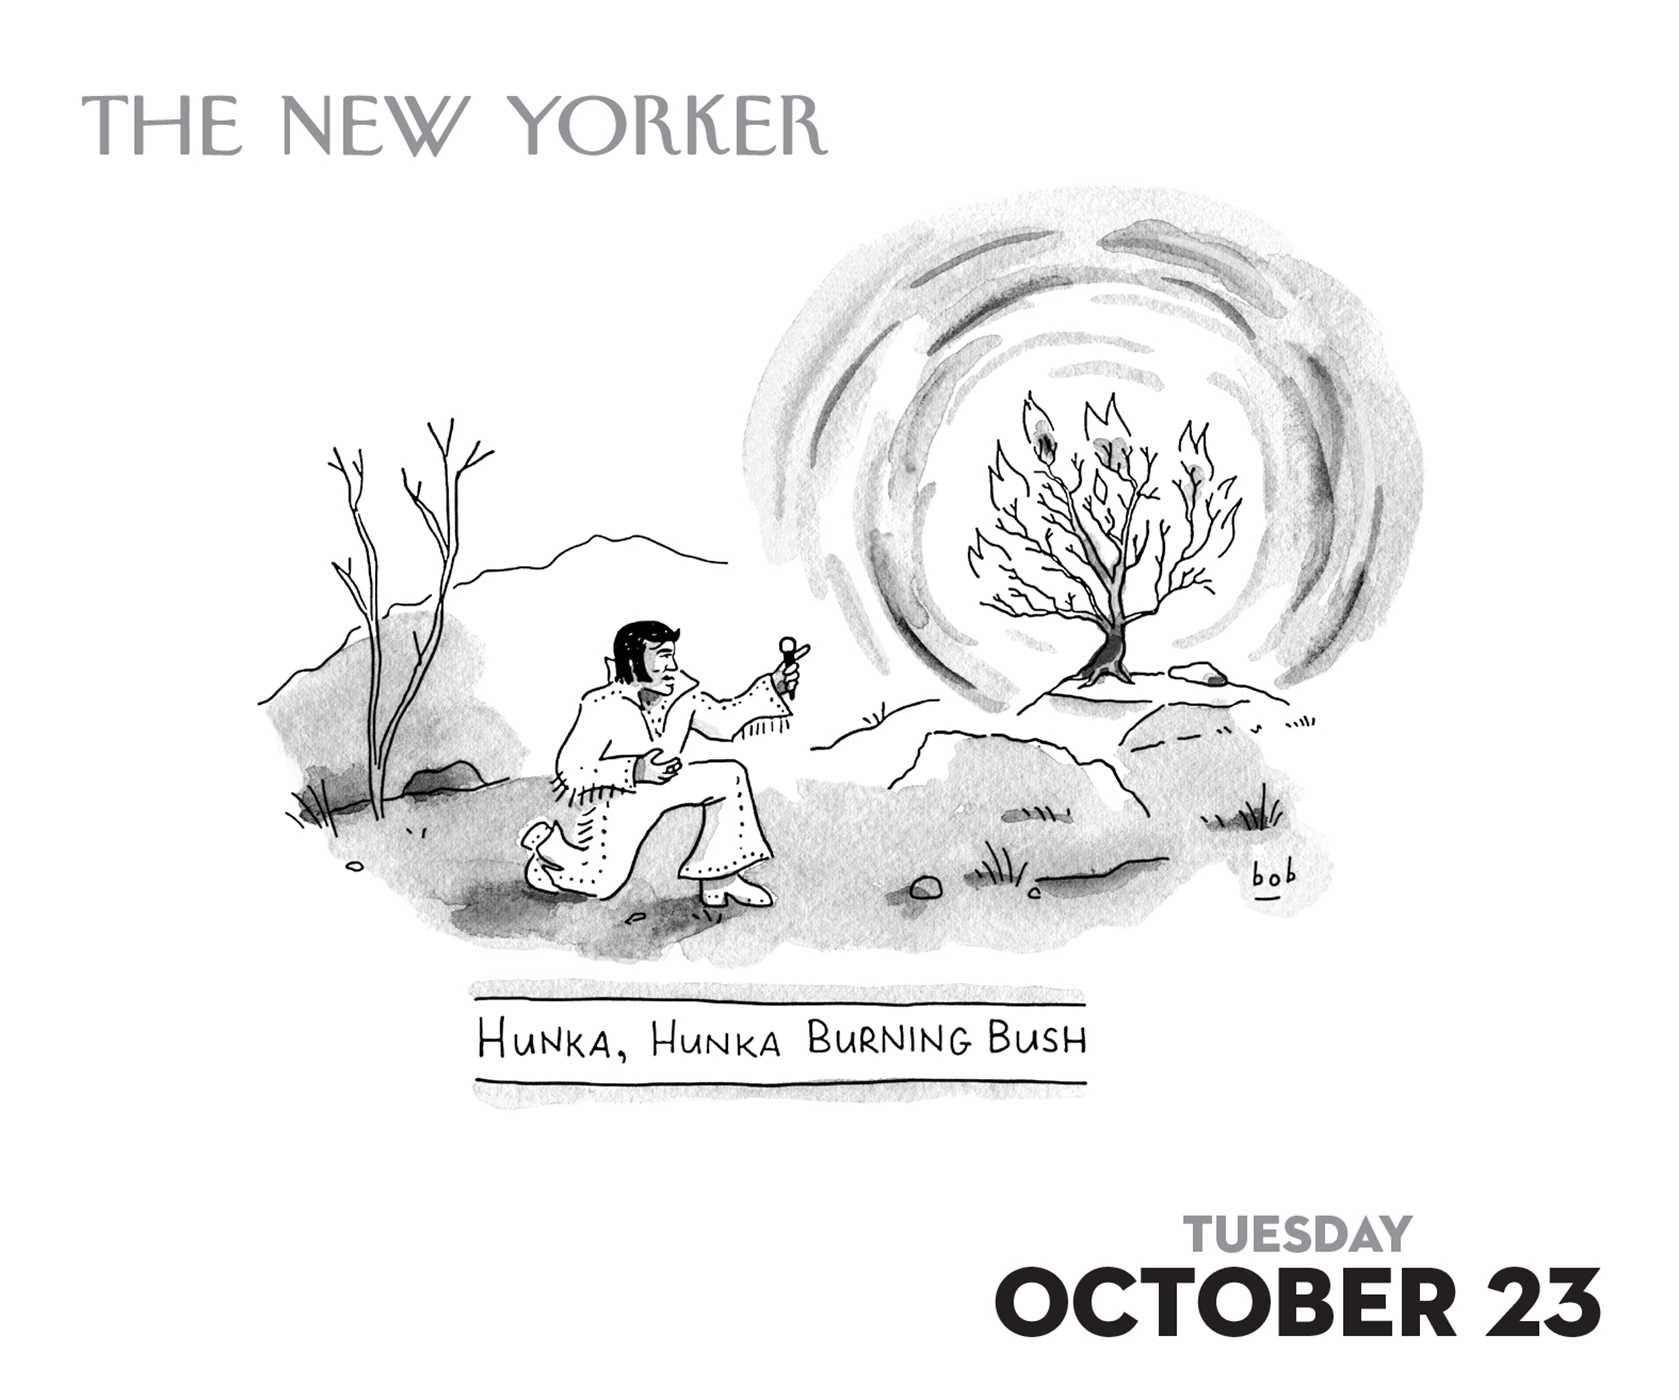 Cartoons from The New Yorker 2018 Day-to-Day Calendar